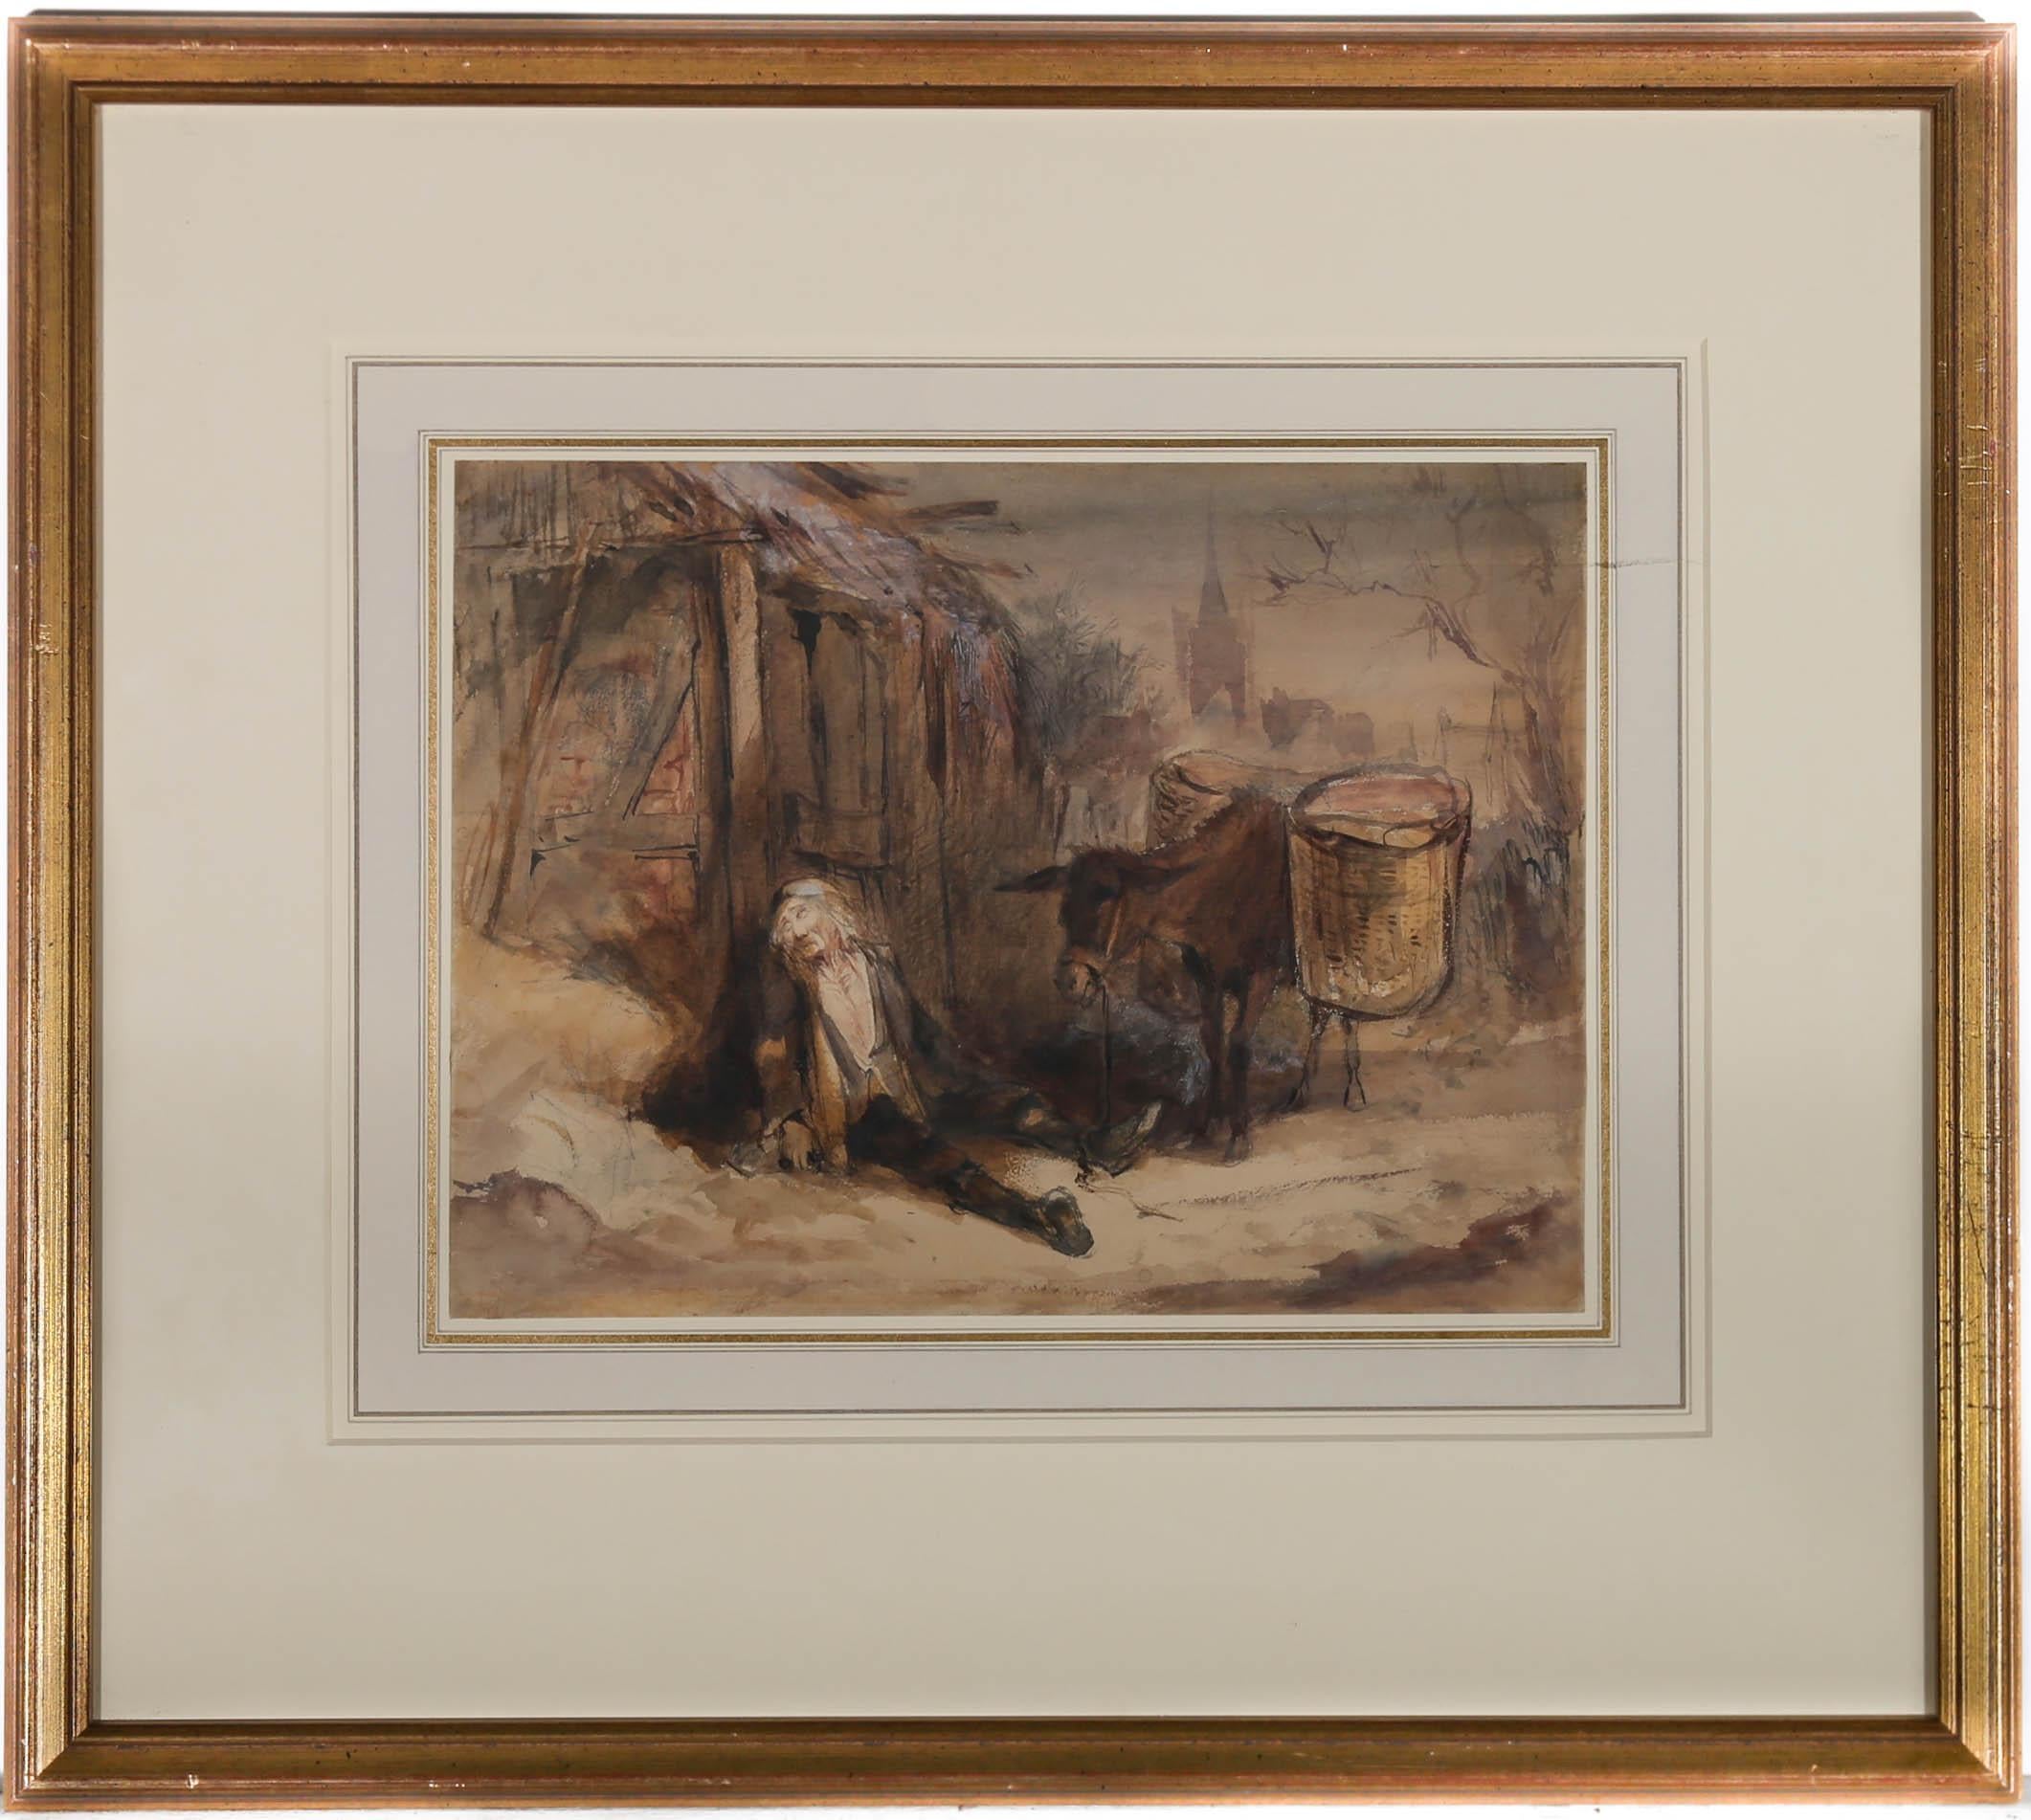 Napping before the Journey home- This charming genre scene by George Cattermole RWS (1800-1868), depicts a frail man having a quiet Siesta in the street, with his dutiful donkey standing watch. This particular figure has been noted in another of